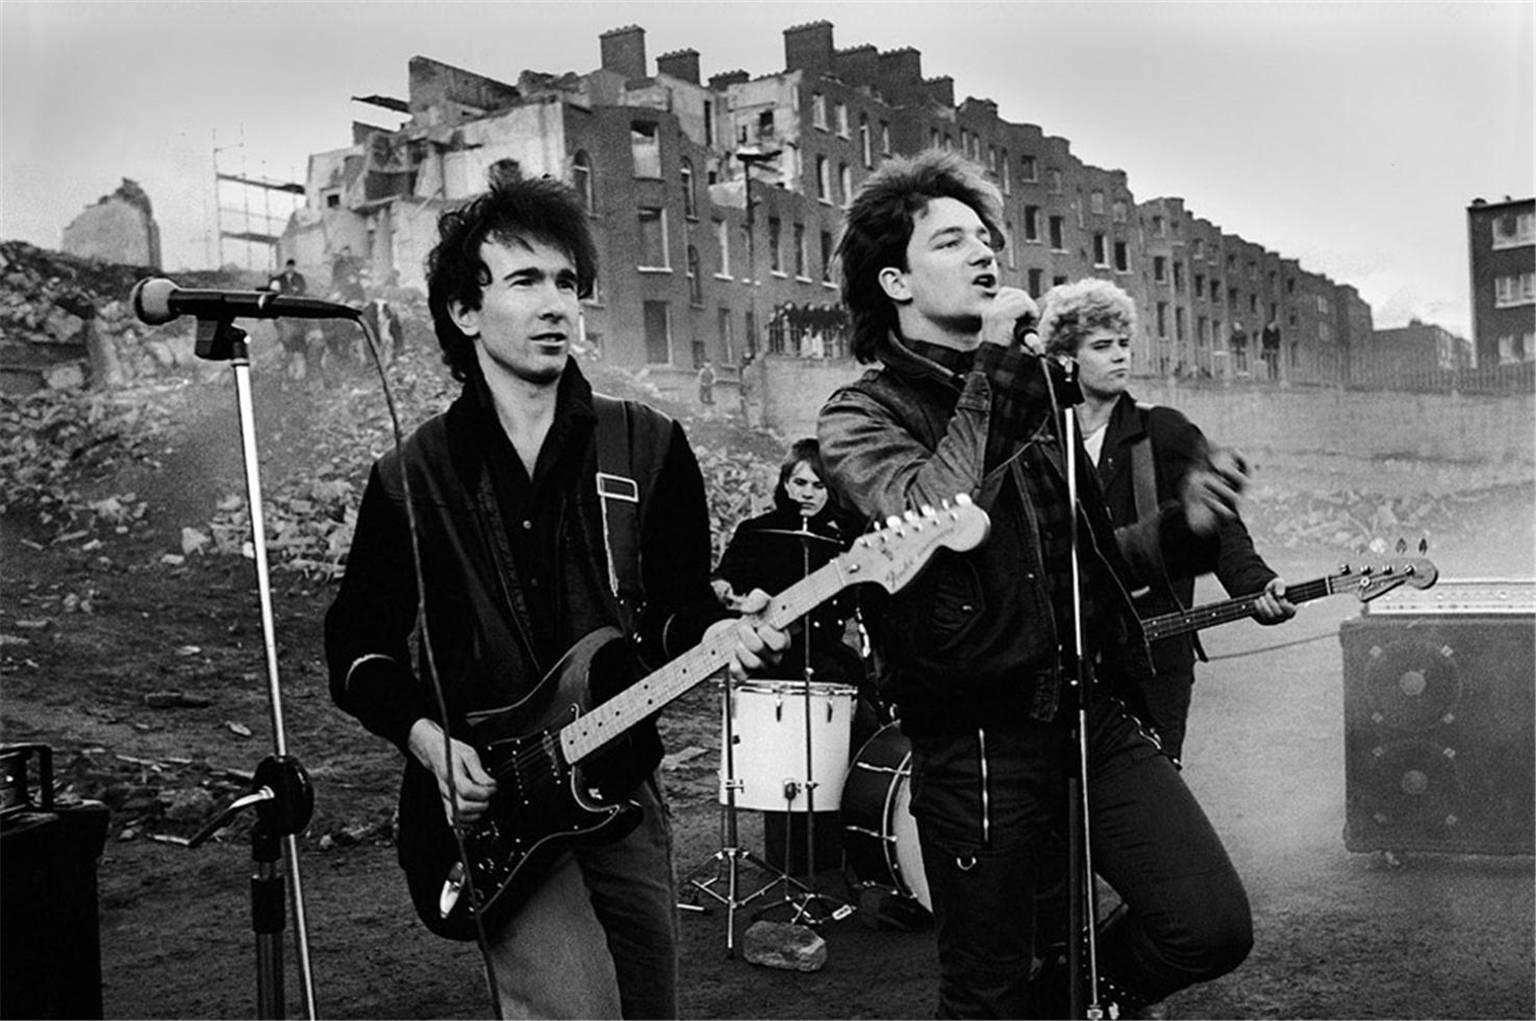 Colm Henry Black and White Photograph - U2 in Summerhill, Dublin City, Ireland 1981